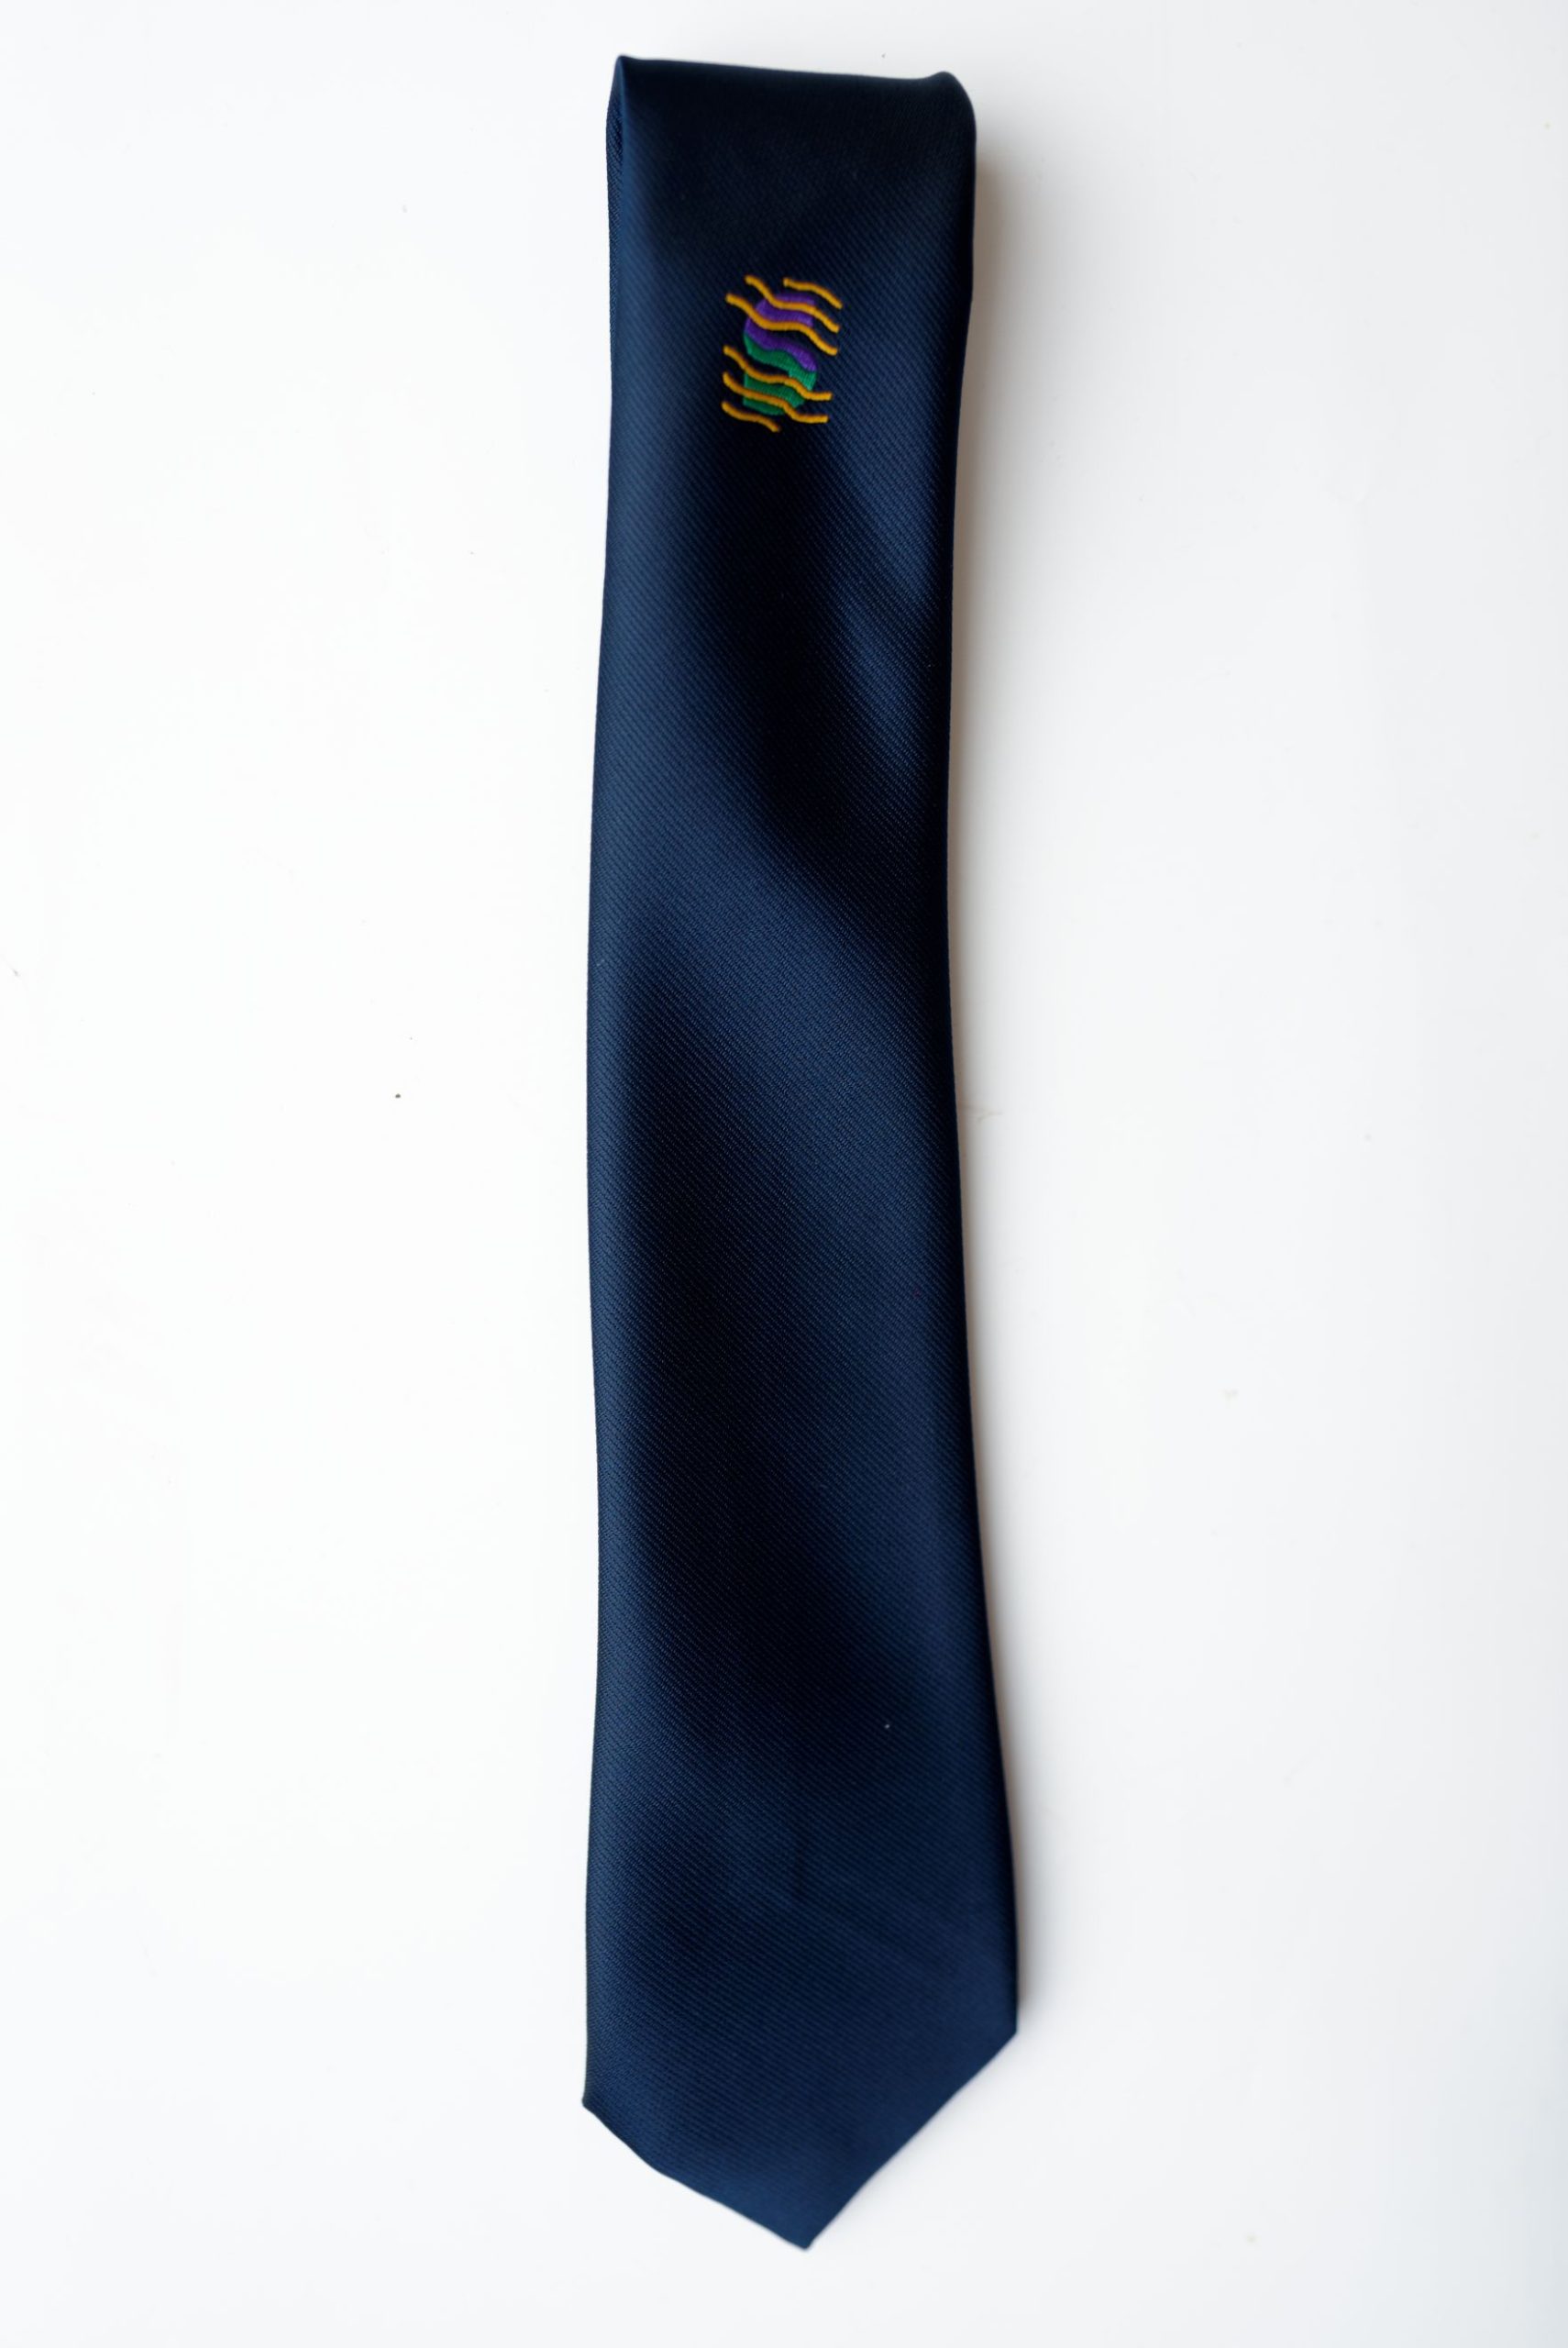 Shimna Integrated College Year 6 tie